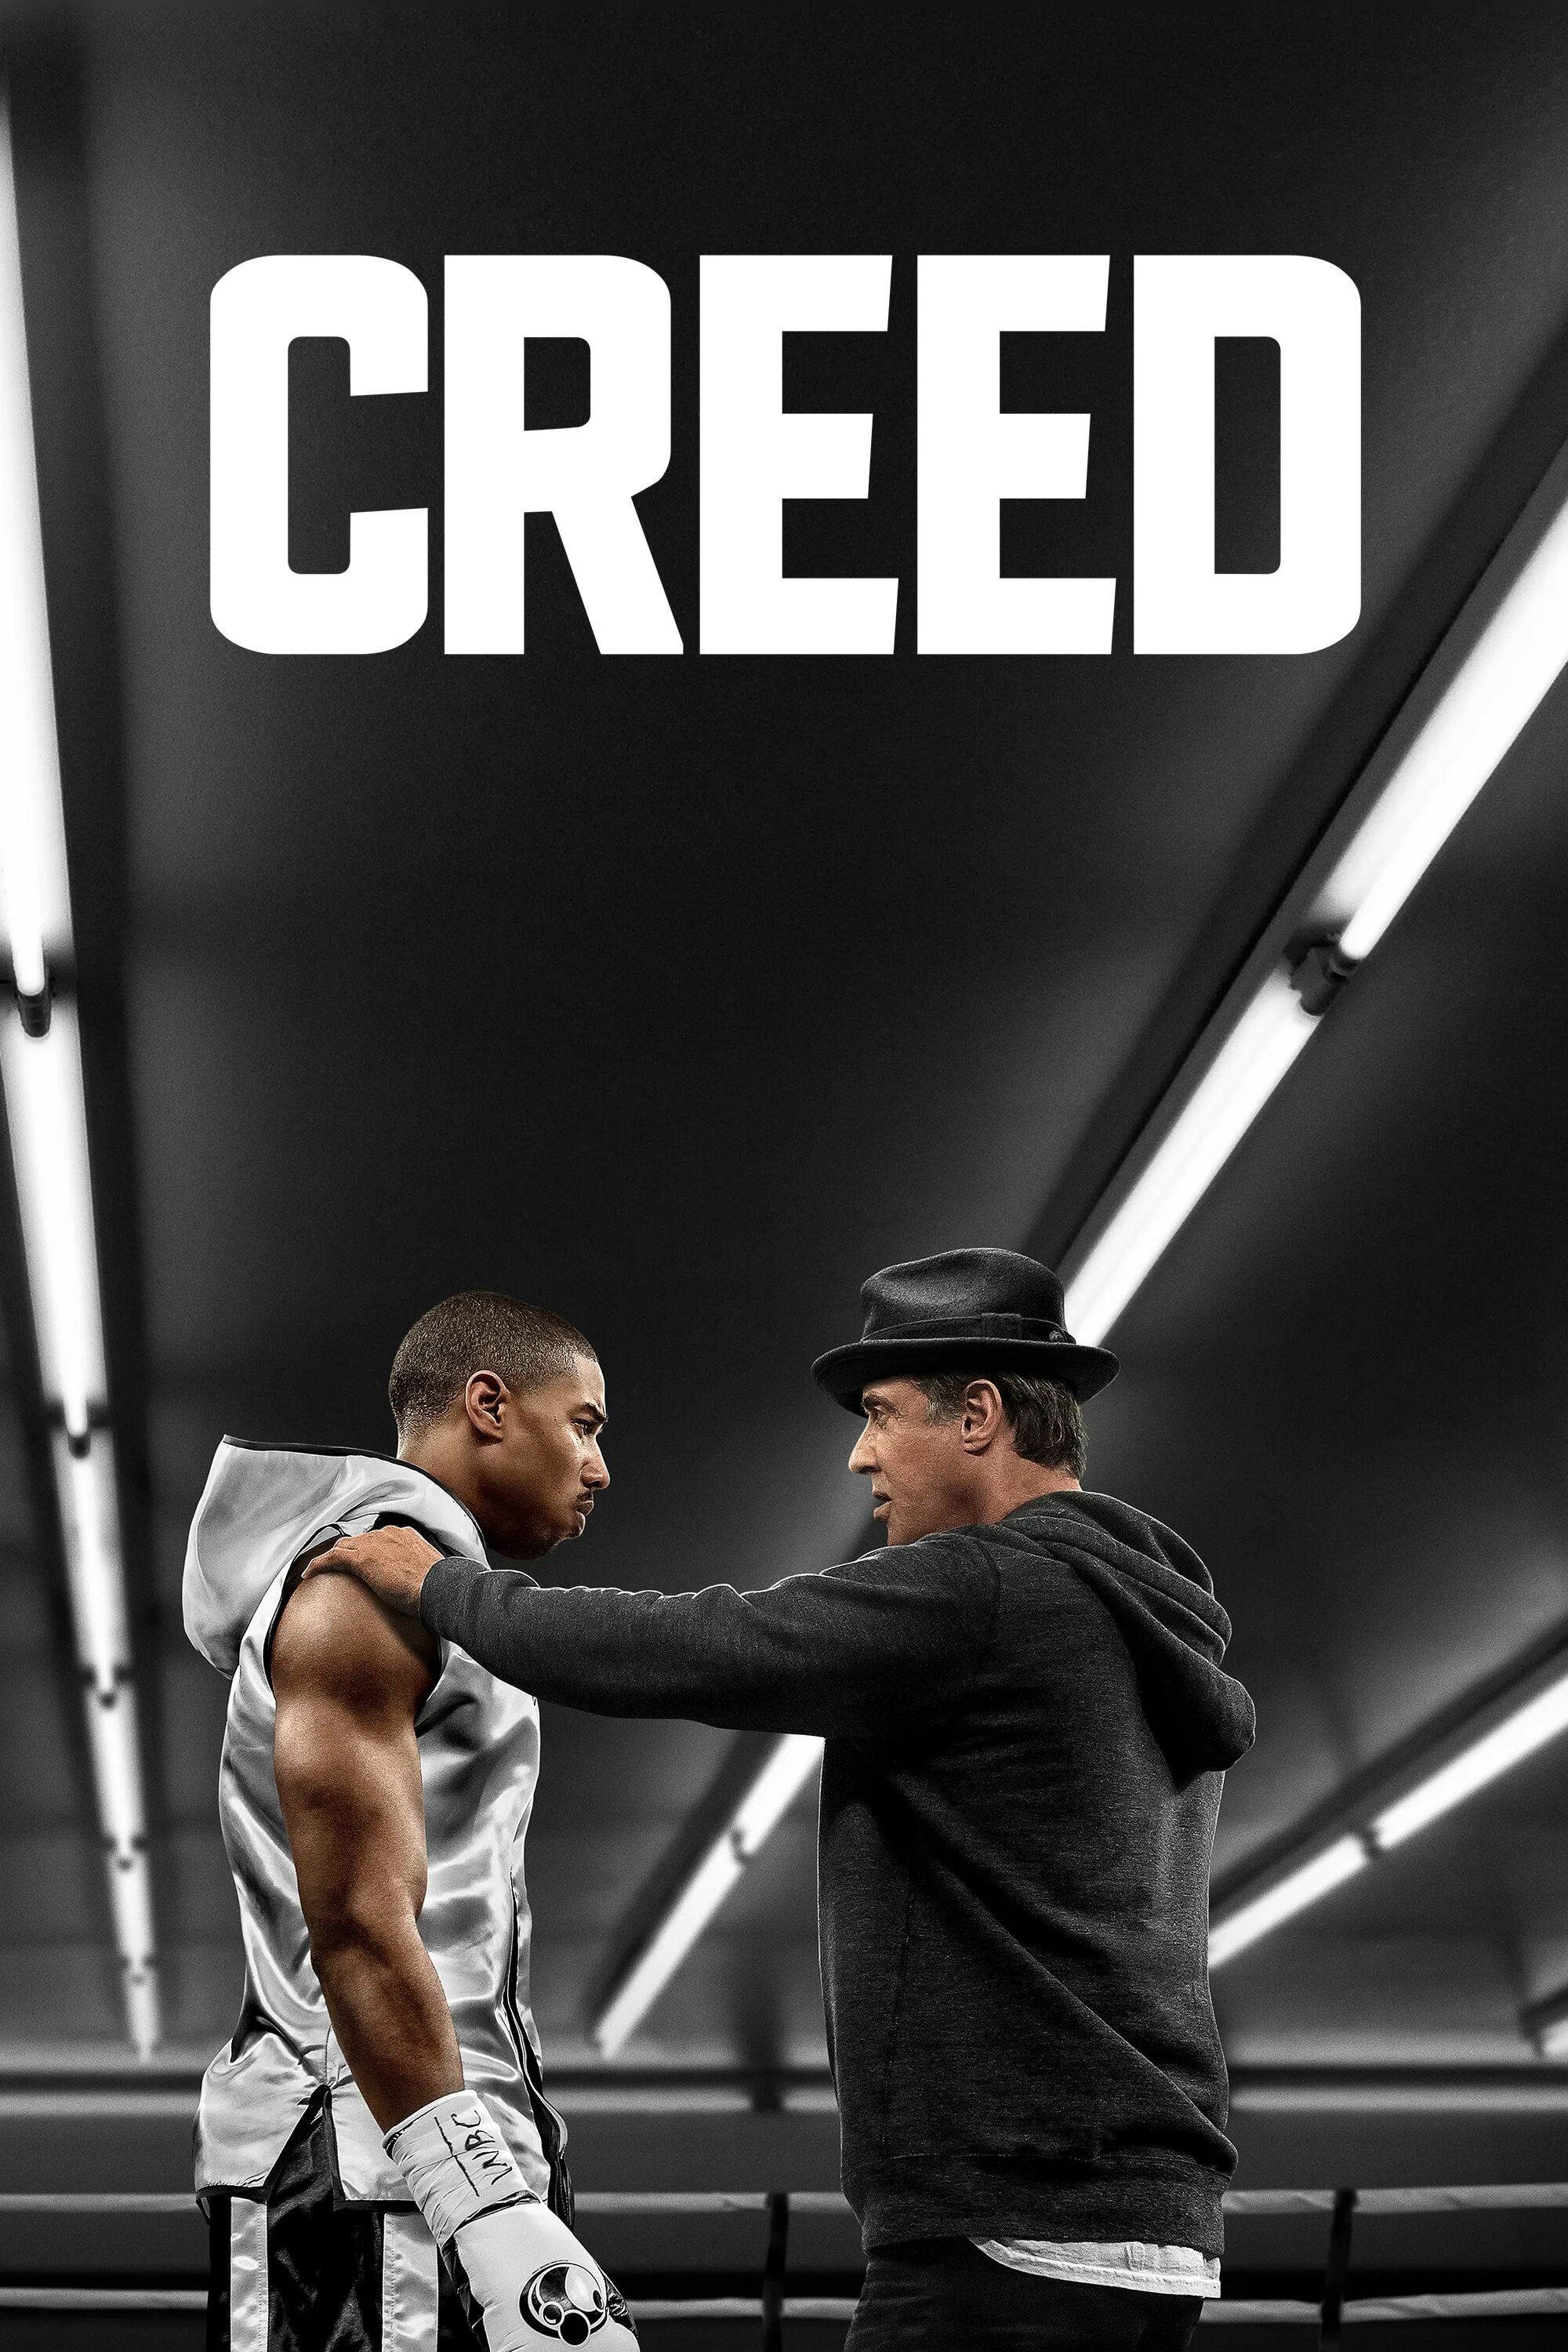 Creed soundtrack. Крид наследие Рокки. Крид: наследие Рокки (2015).